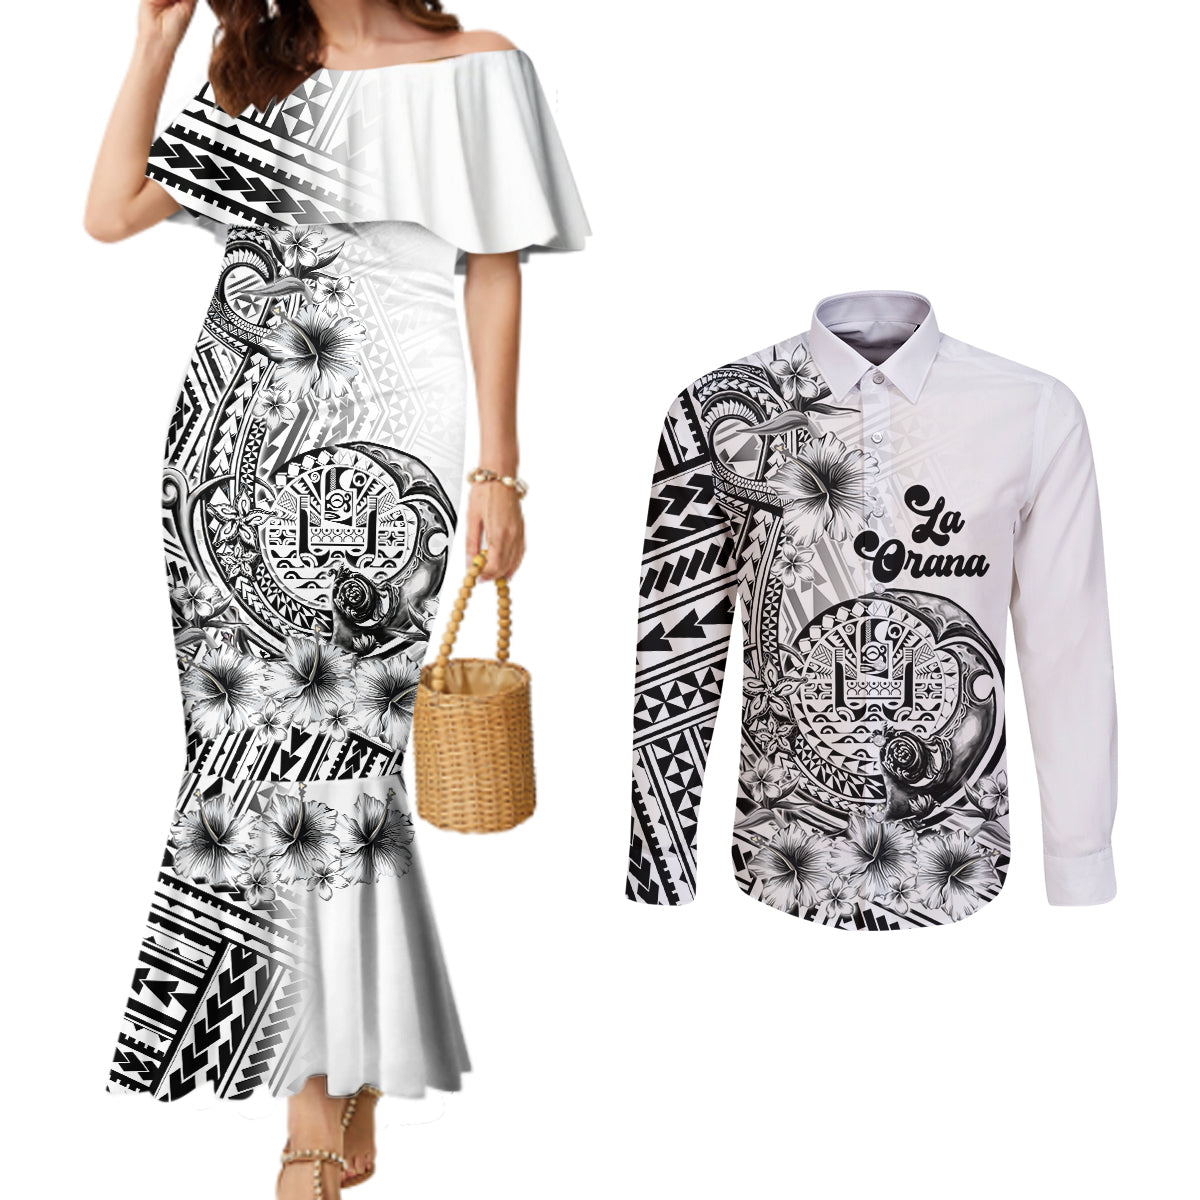 La Orana Tahiti Personalised Couples Matching Mermaid Dress and Long Sleeve Button Shirt French Polynesia Hook Tattoo Special White Color LT9 White - Polynesian Pride